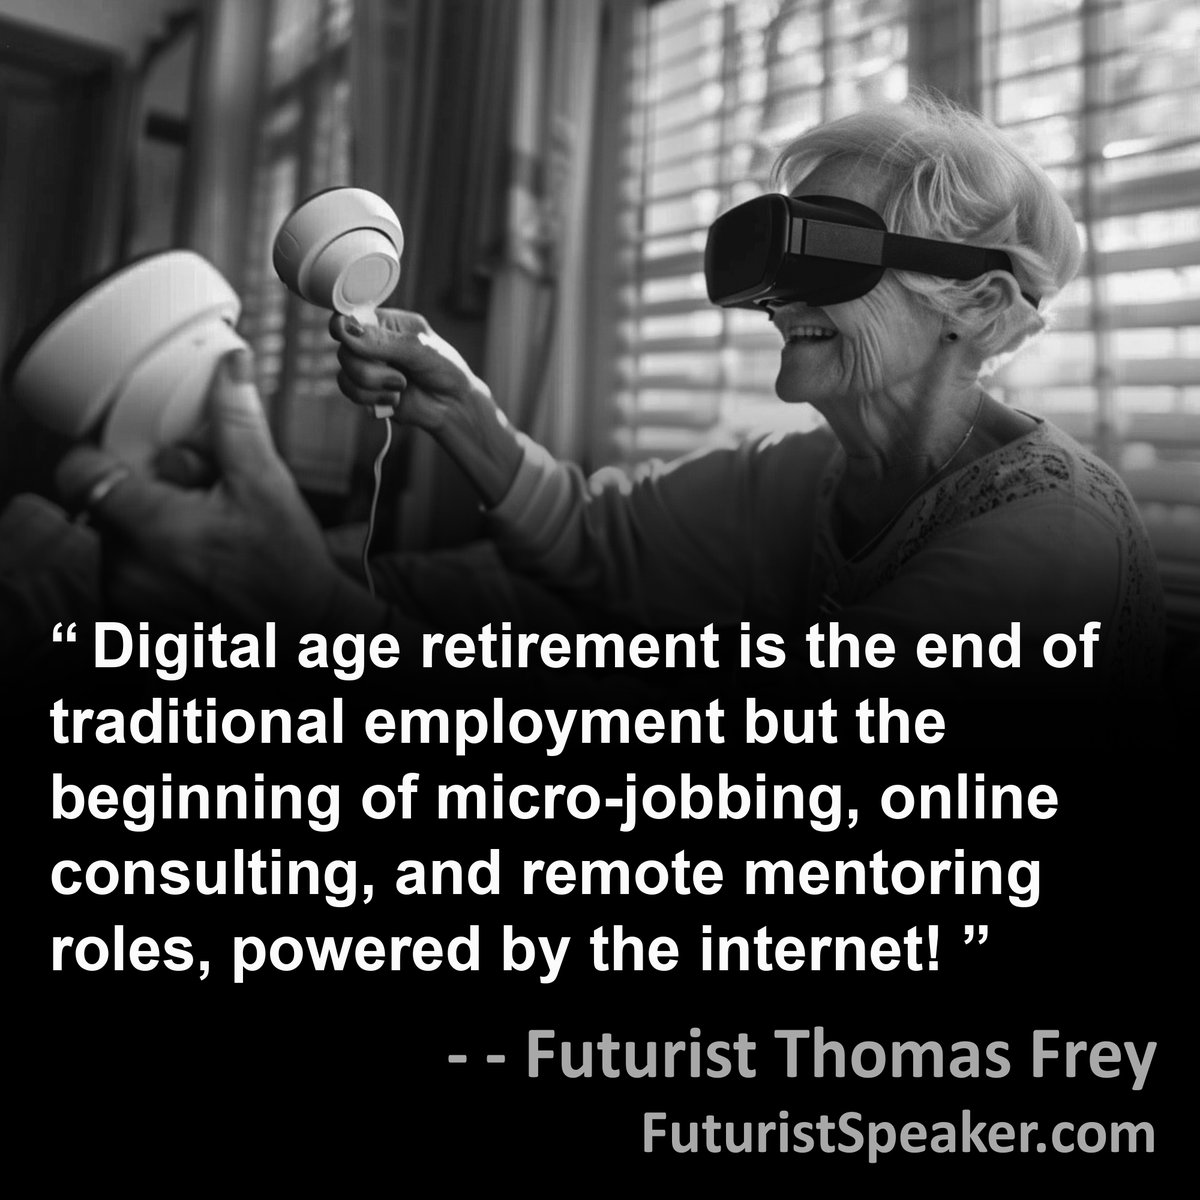 'Digital age retirement is the end of traditional employment but the beginning of micro-jobbing, online consulting, and remote mentoring roles, powered by the internet!'
FuturistSpeaker.com #foresight #predictions #futuretrends #futureofwork #futurejobs #keynotespeaker